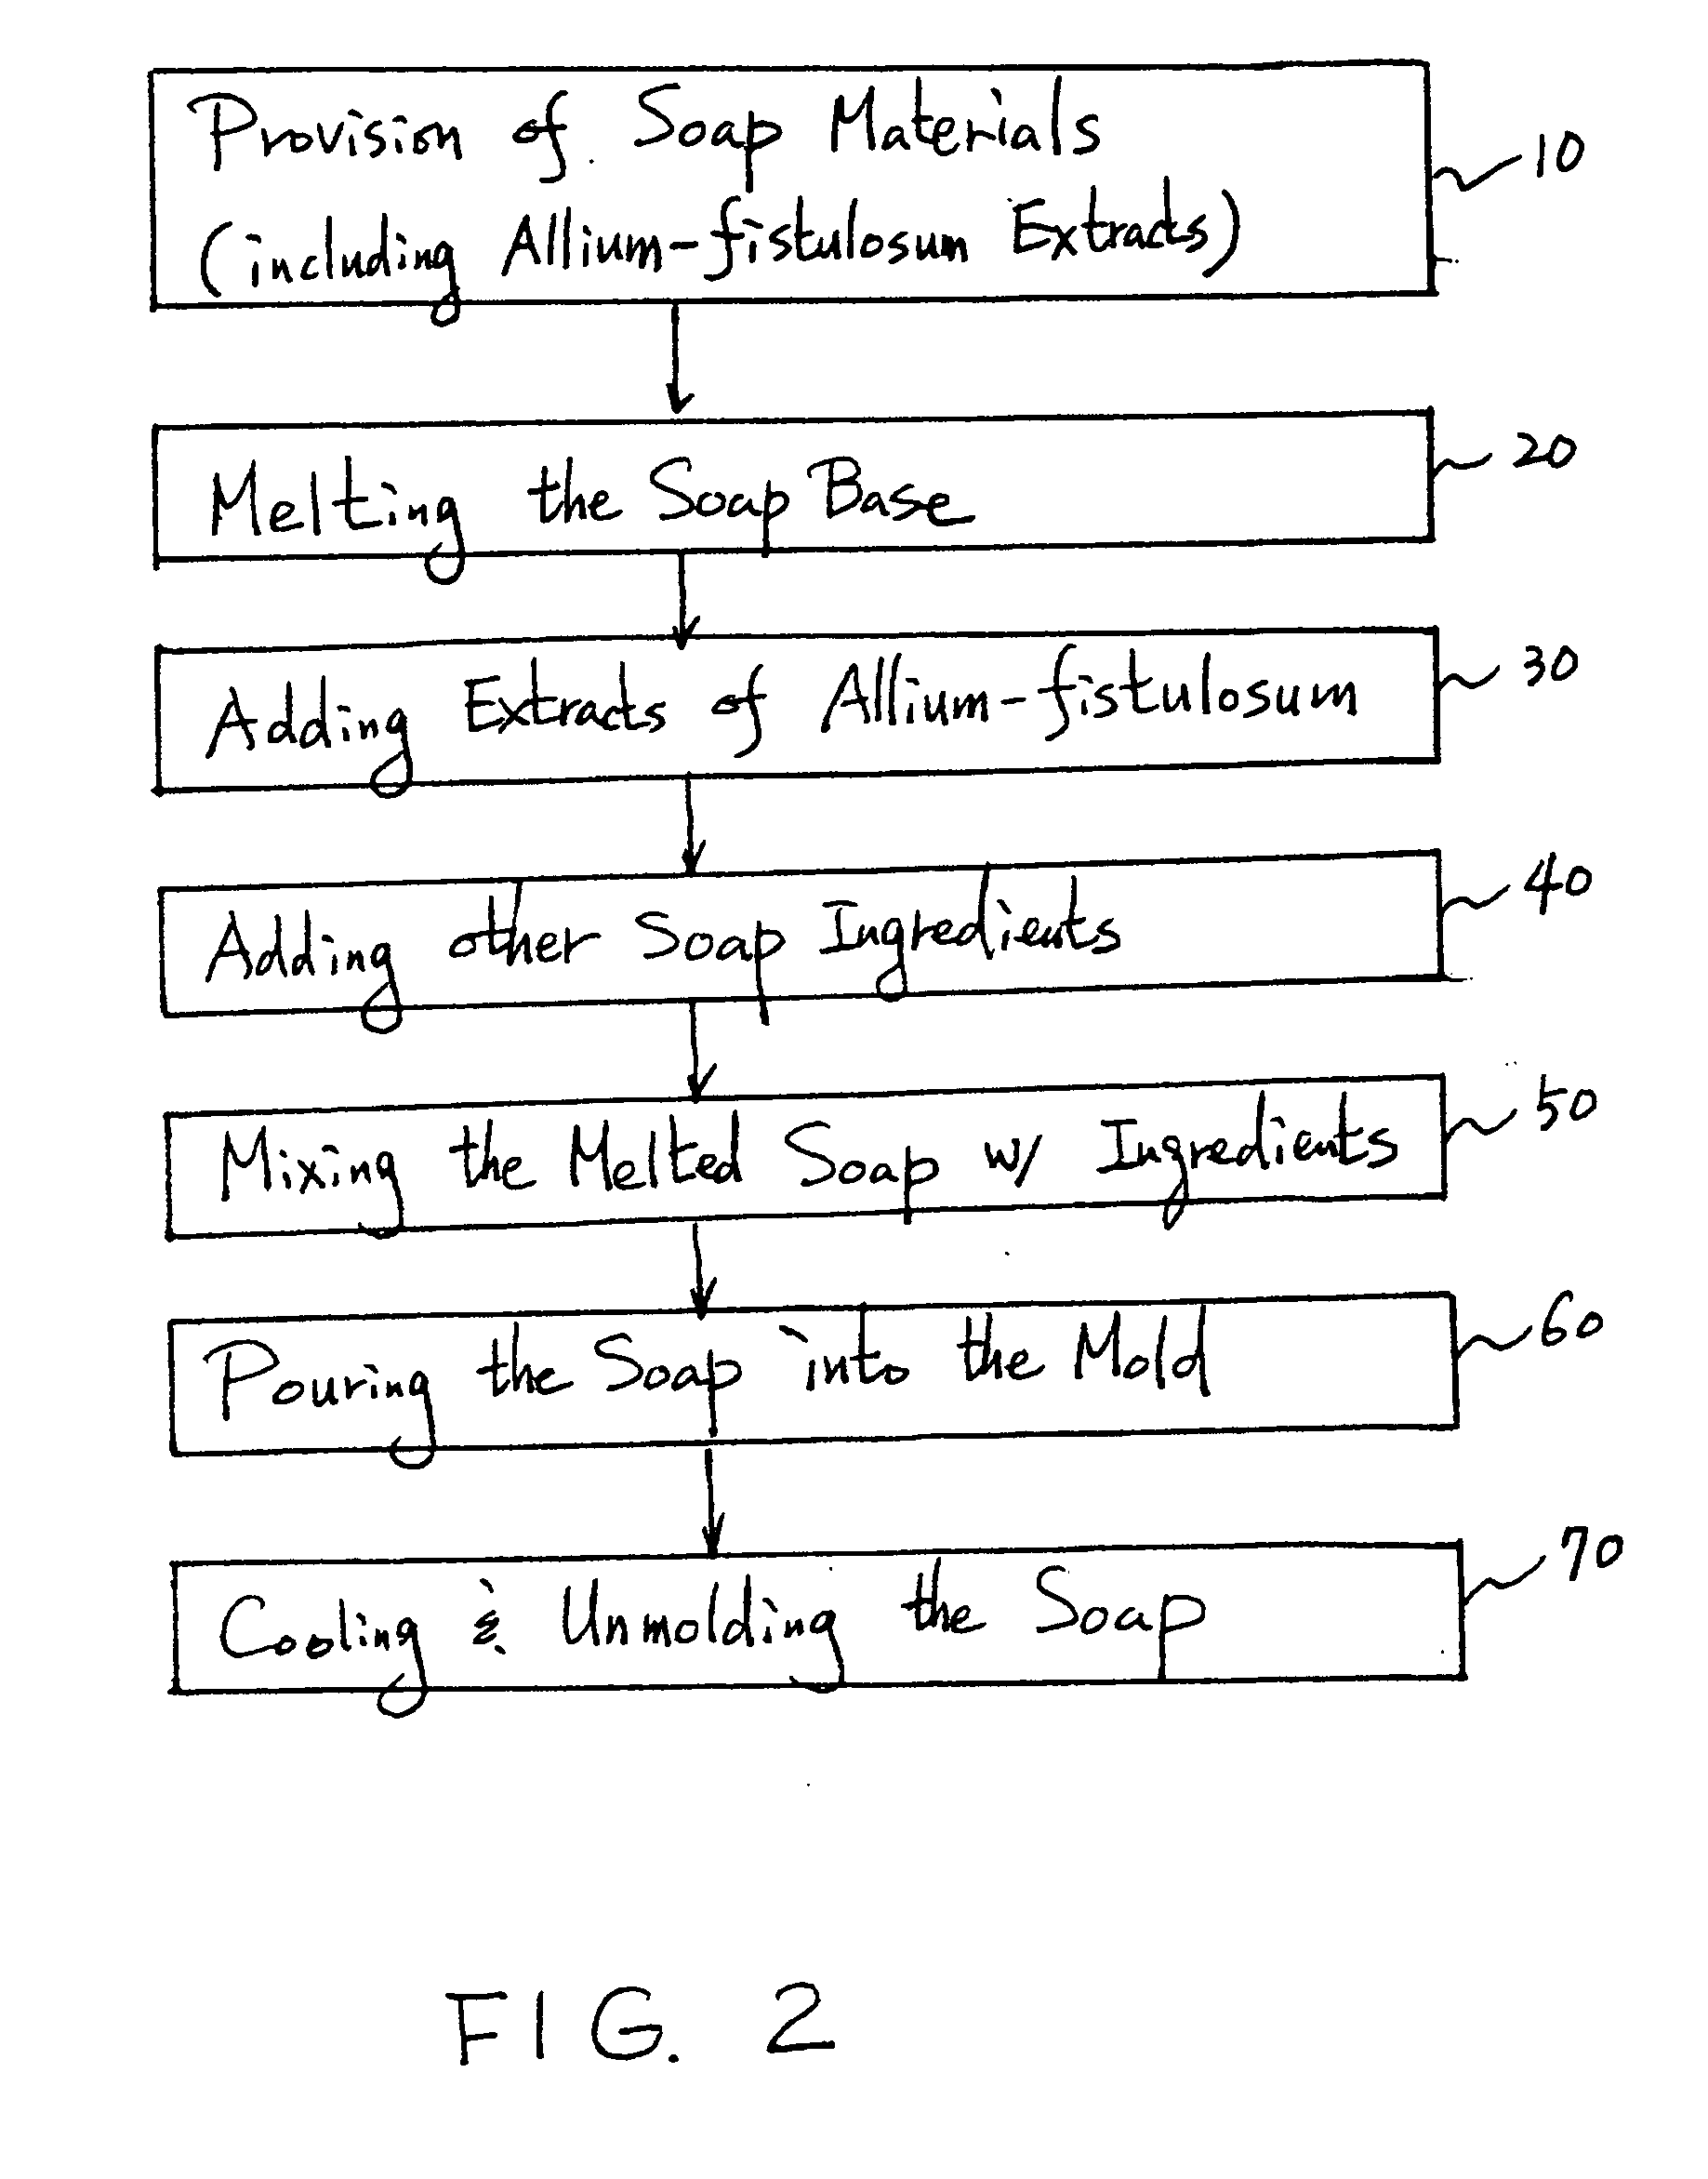 Topical compositions containing plant extracts for personal care